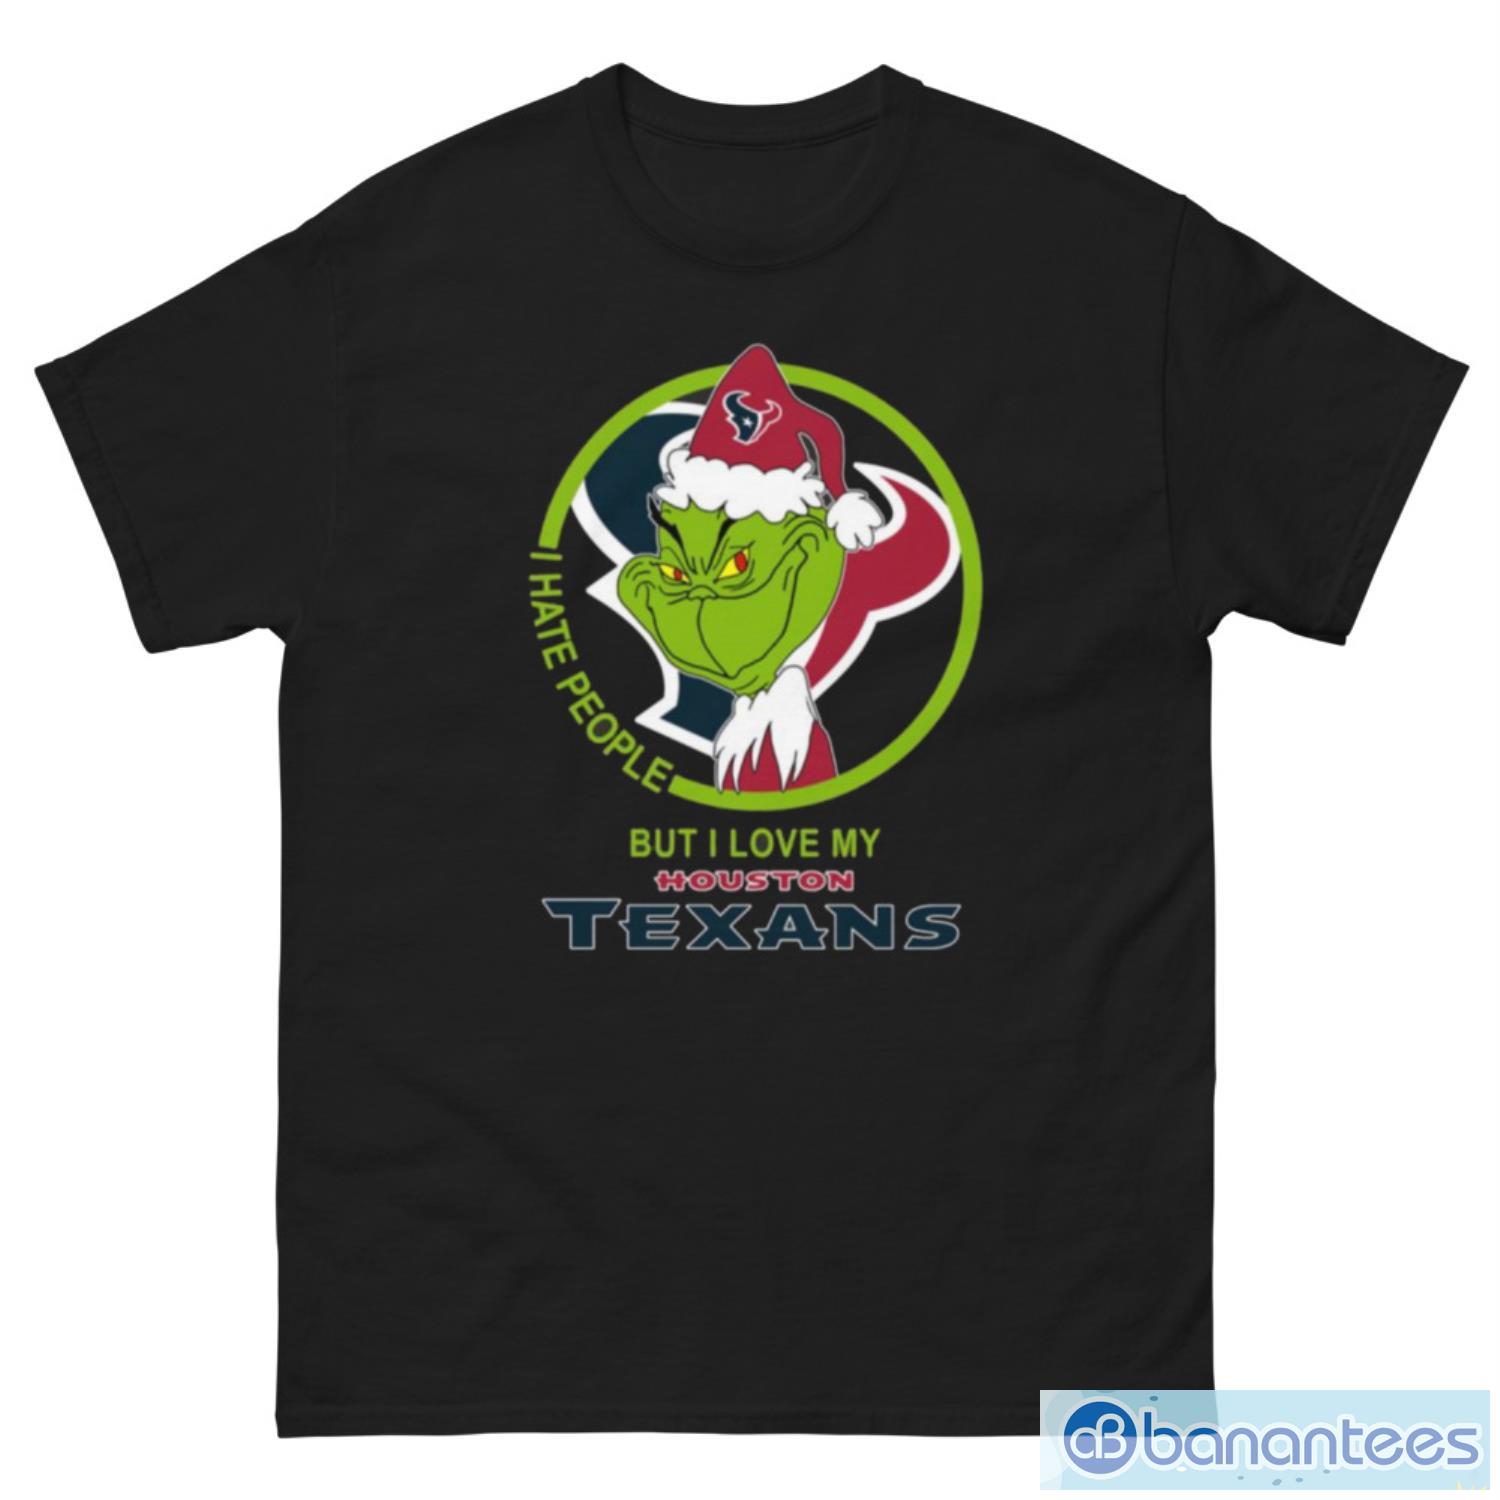 Houston Texans NFL Christmas Grinch I Hate People But I Love My Favorite Football Team T Shirt - G500 Men’s Classic Tee